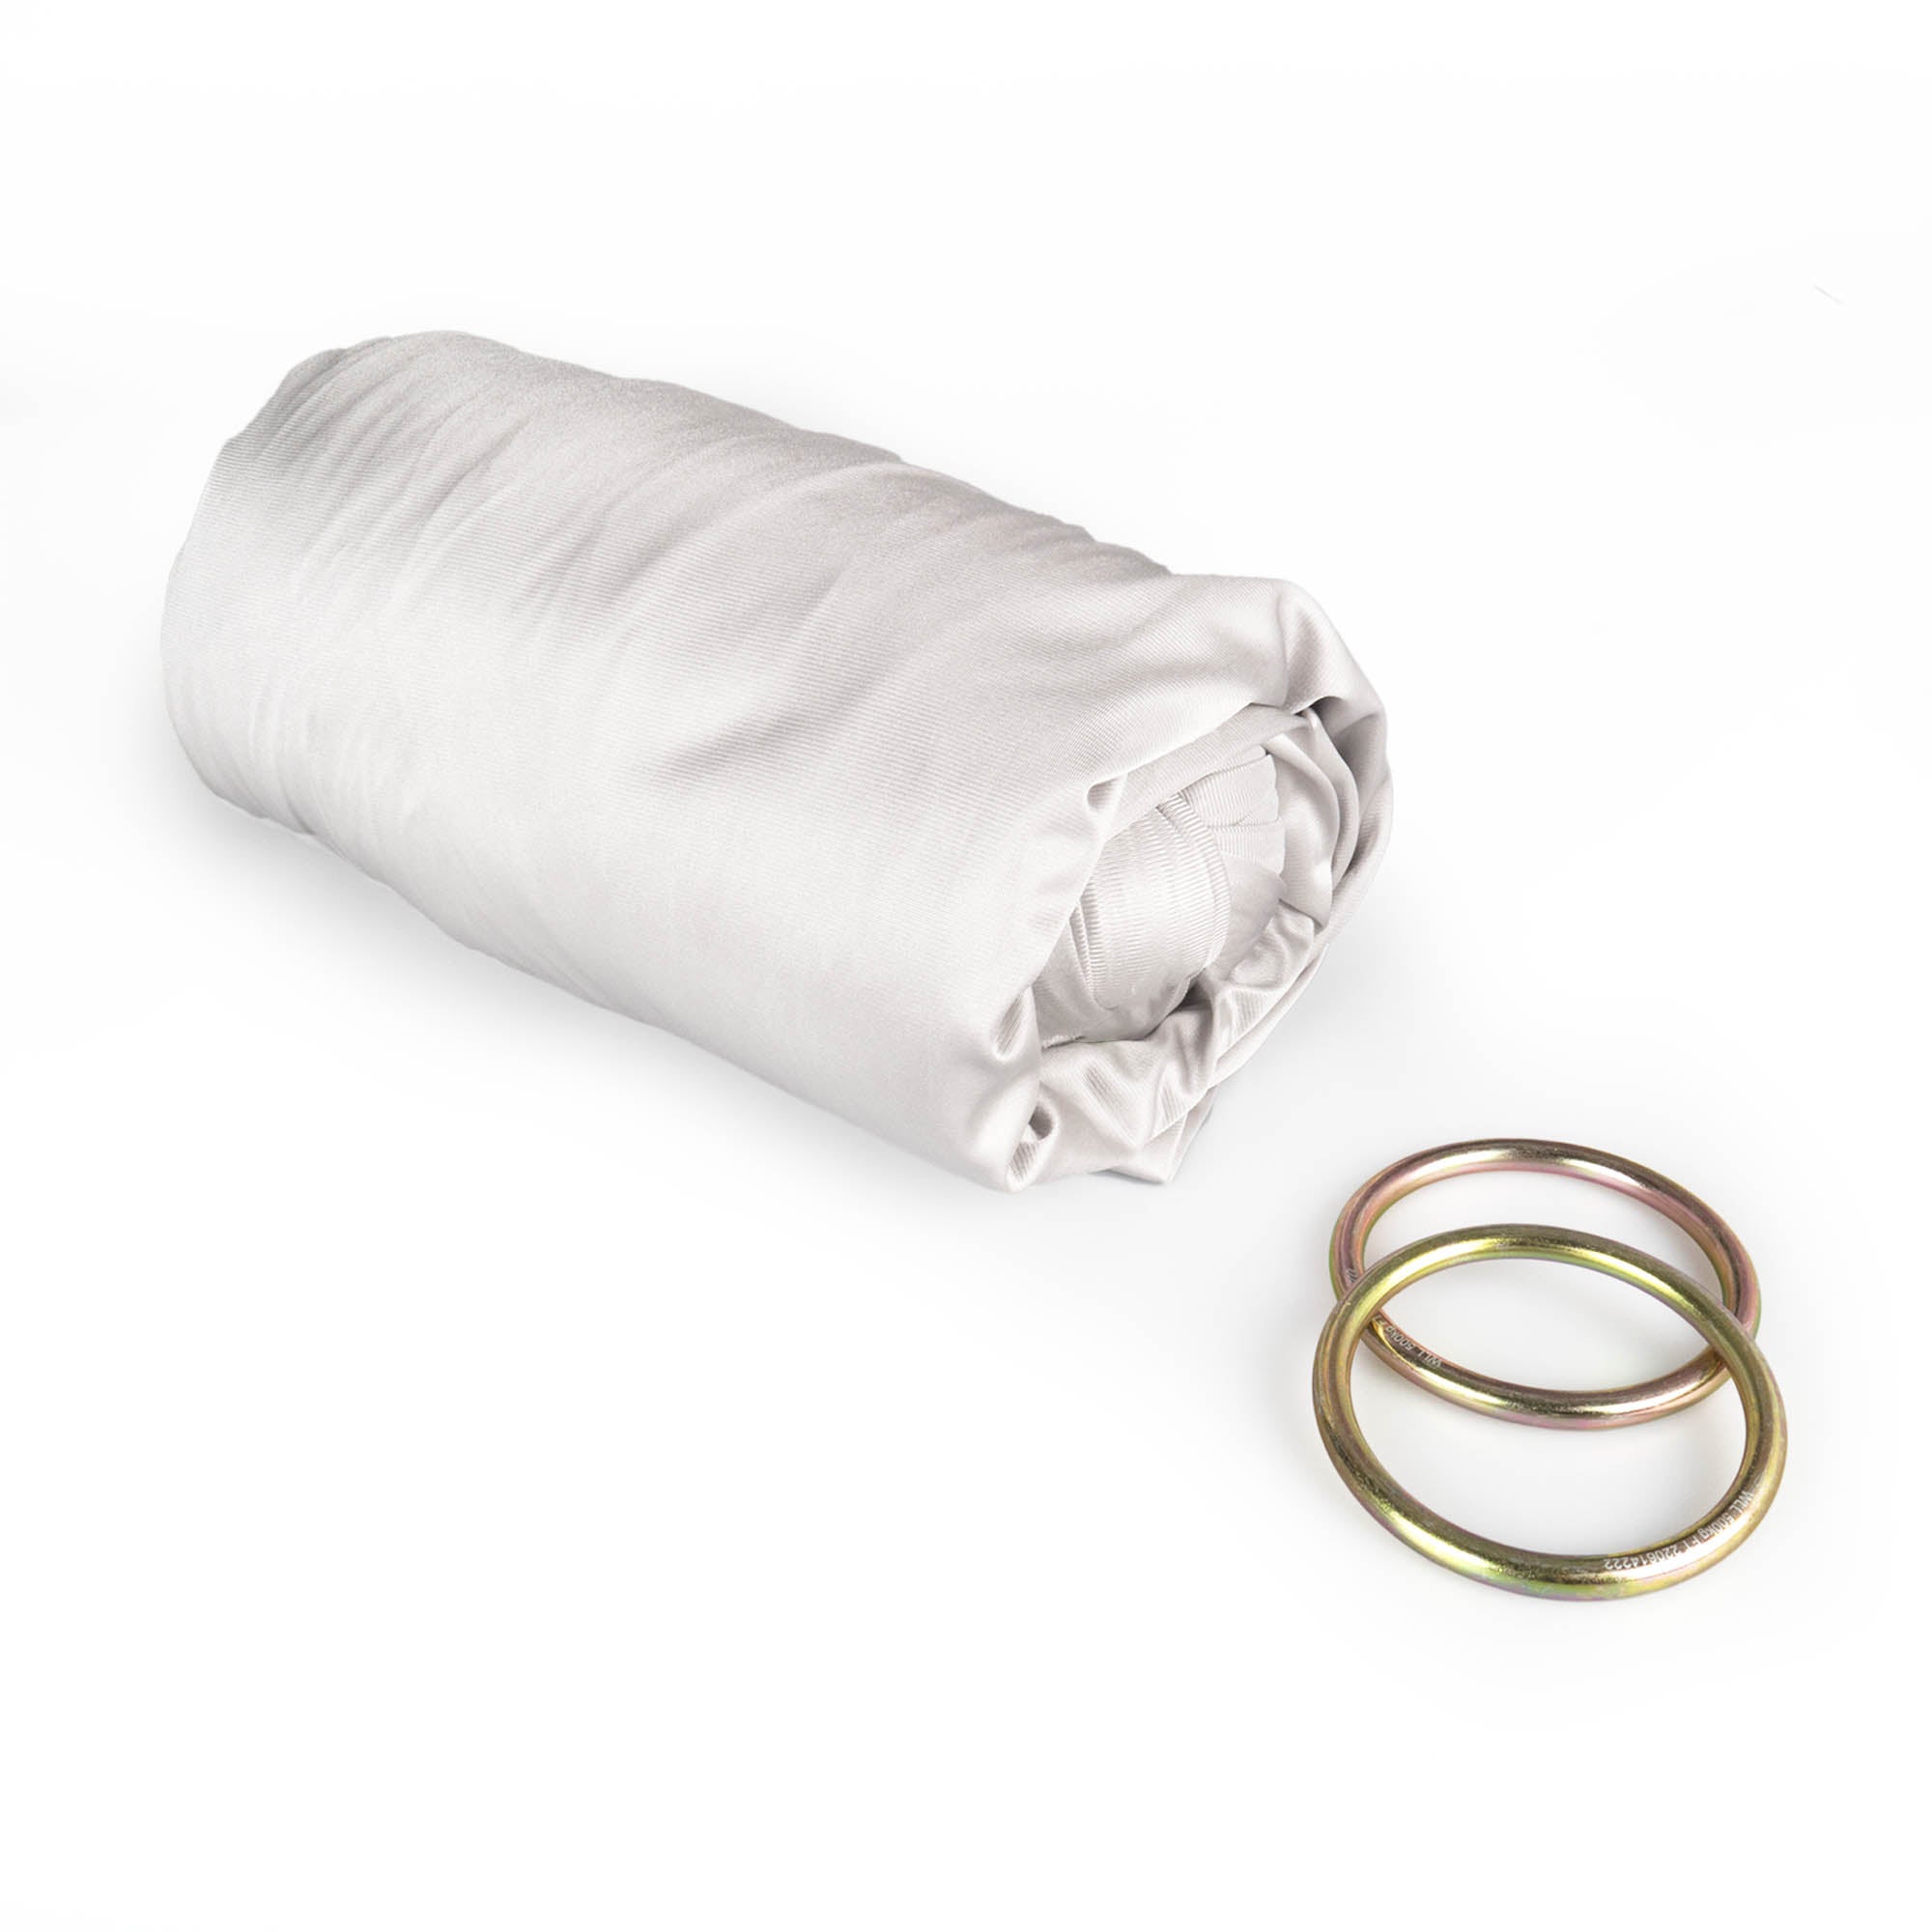 Silver yoga hammock rolled up with ring dettached